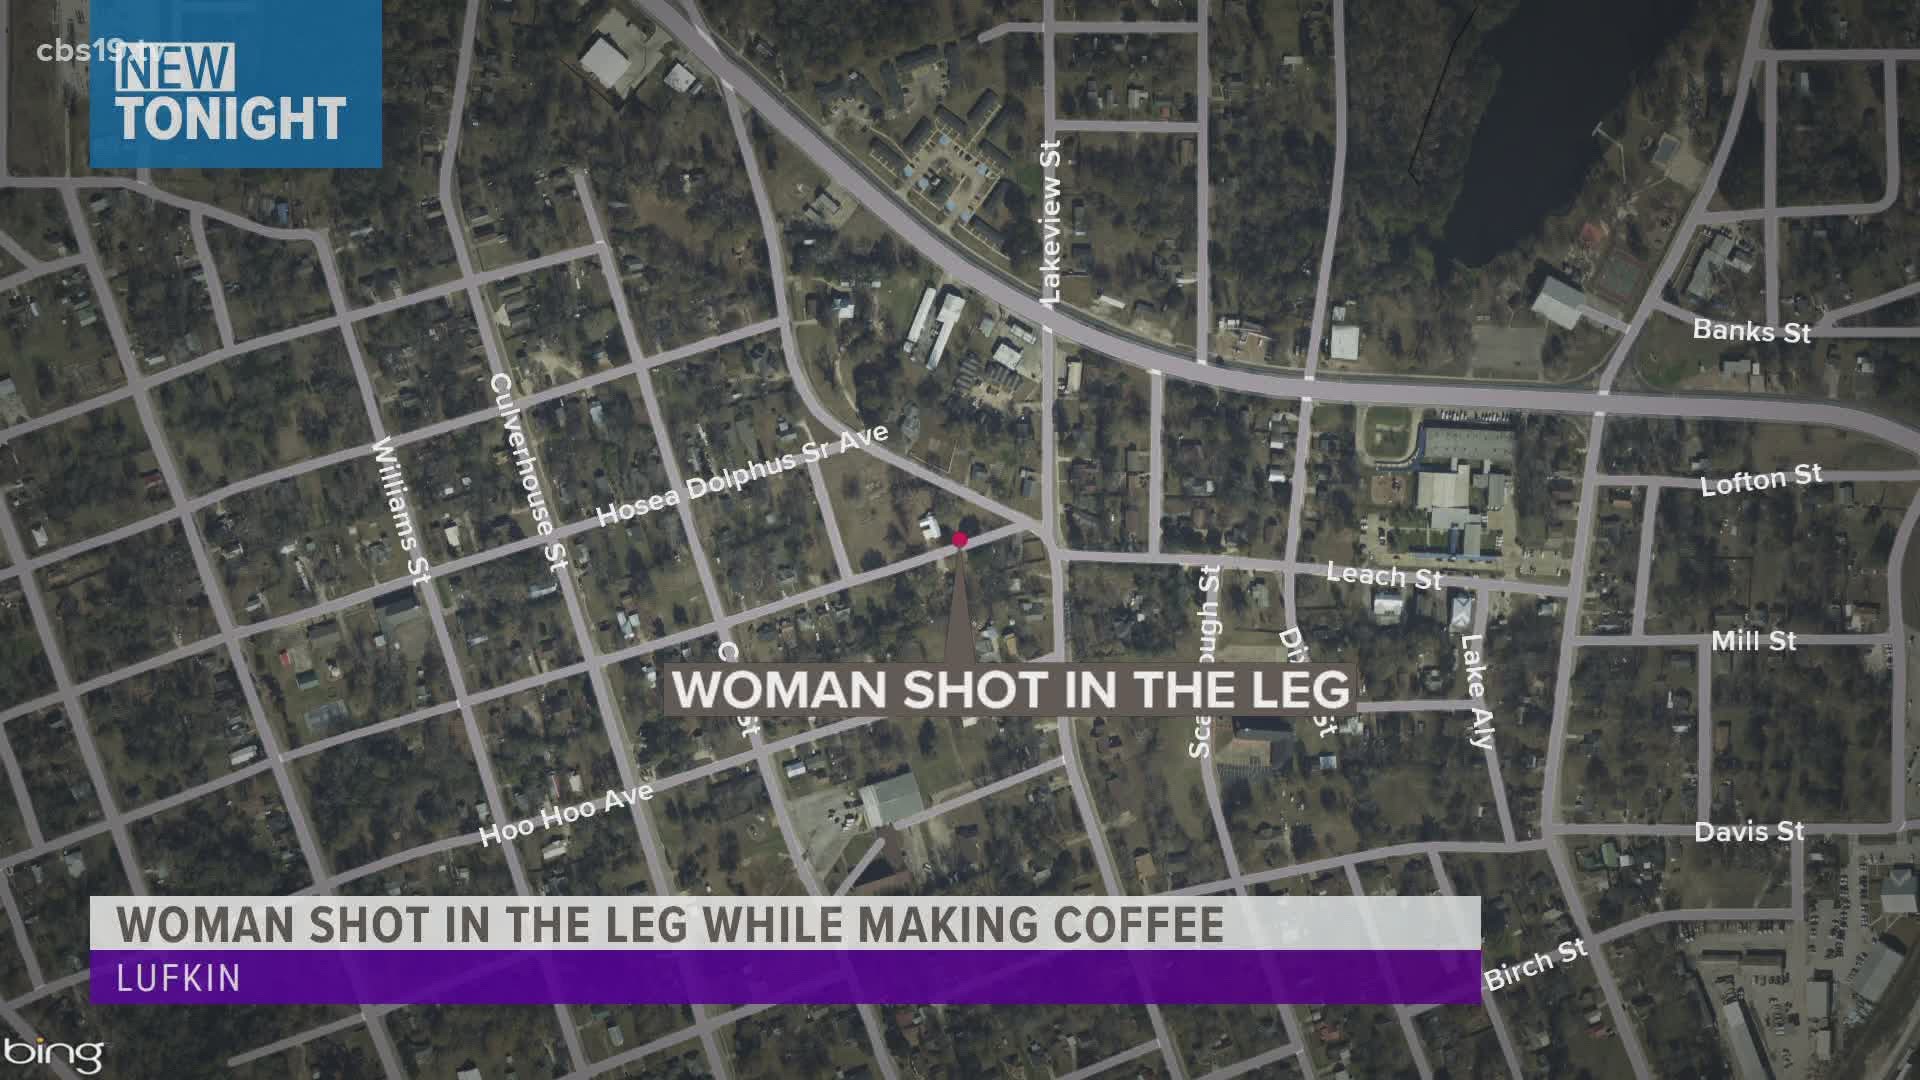 The woman was shot in the 600 block of North Avenue while she was making coffee.